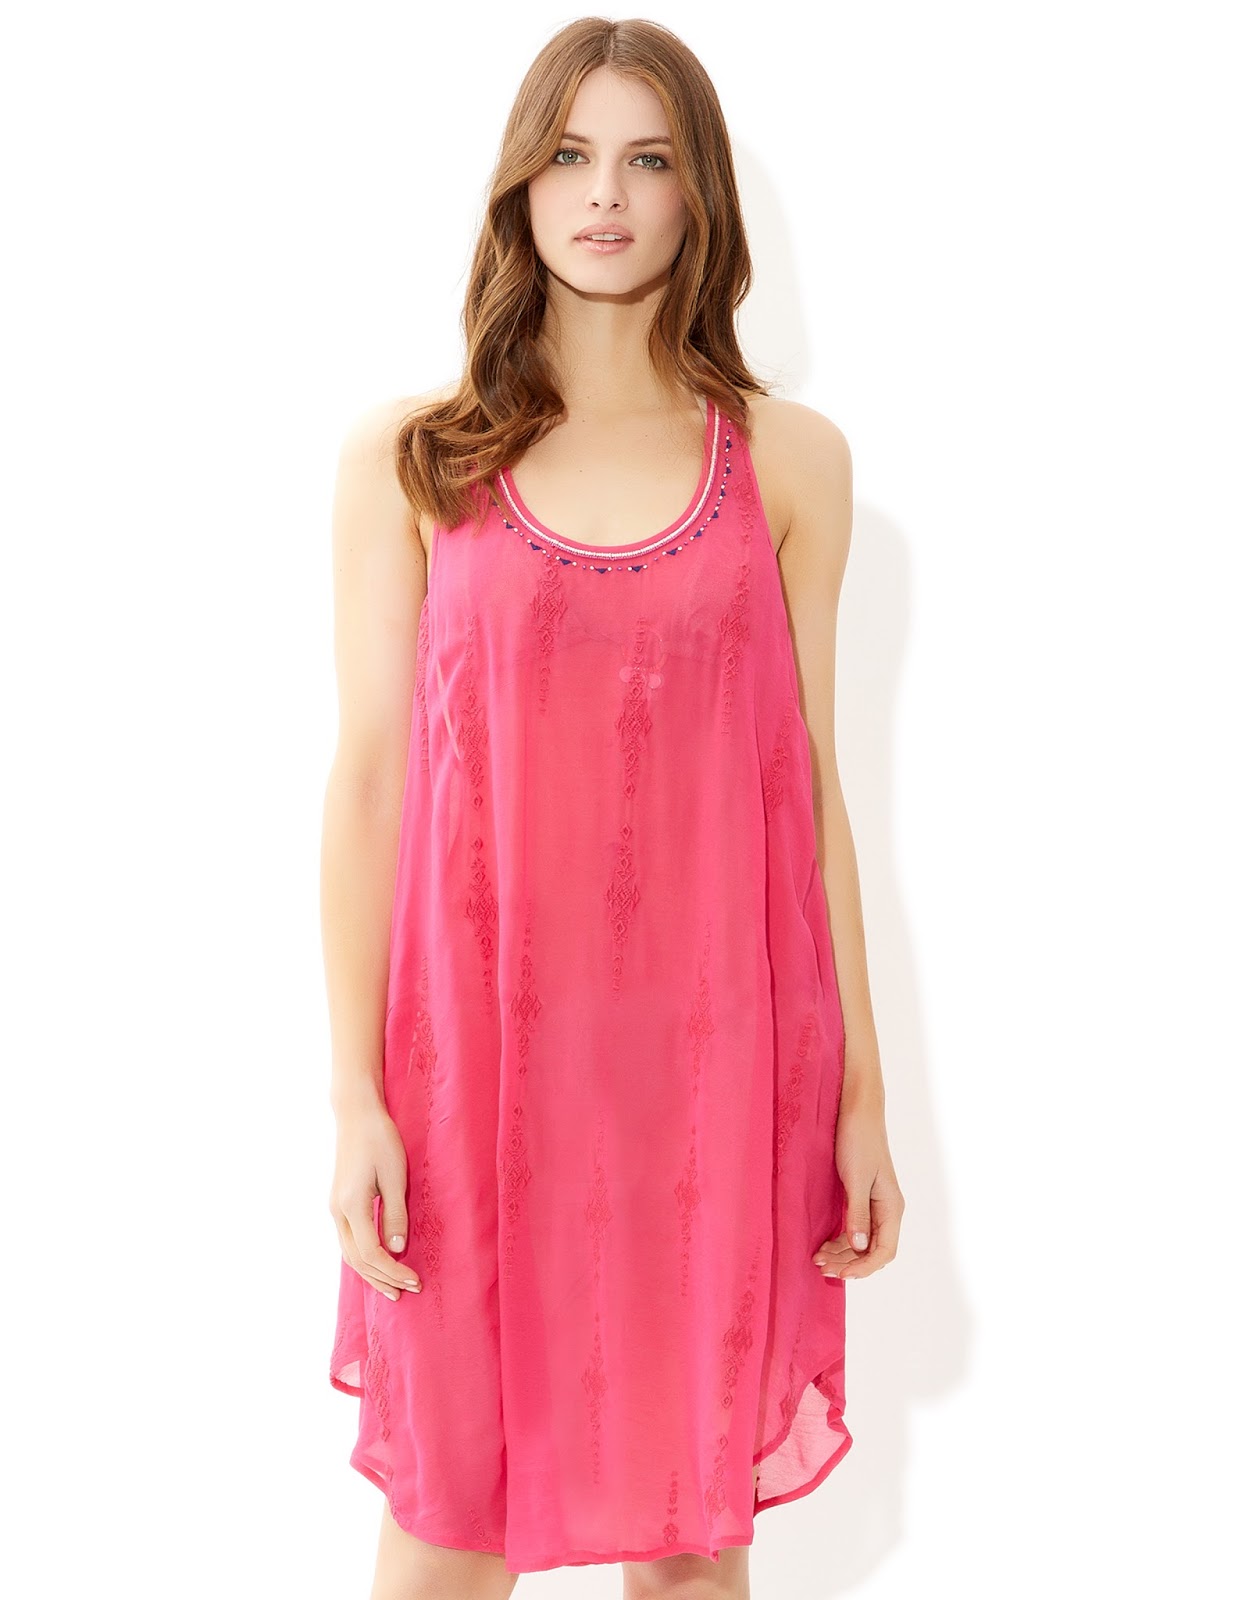 Girls Party Summer Dresses With Pink Embroided Wear And